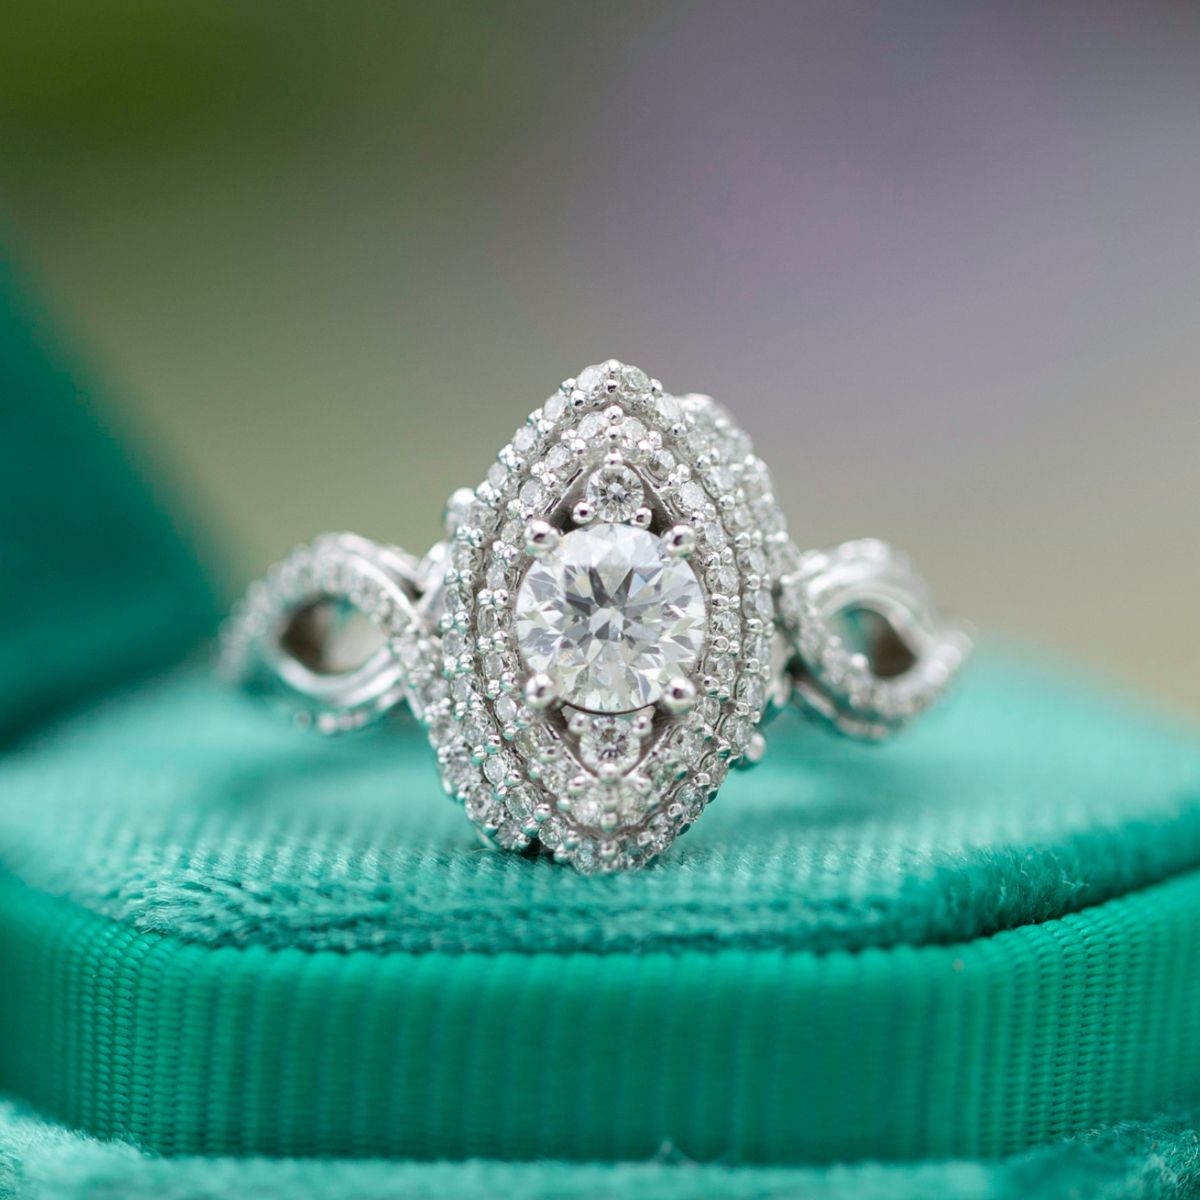 Halo Engagement Ring Styles & Designs | CustomMade.com